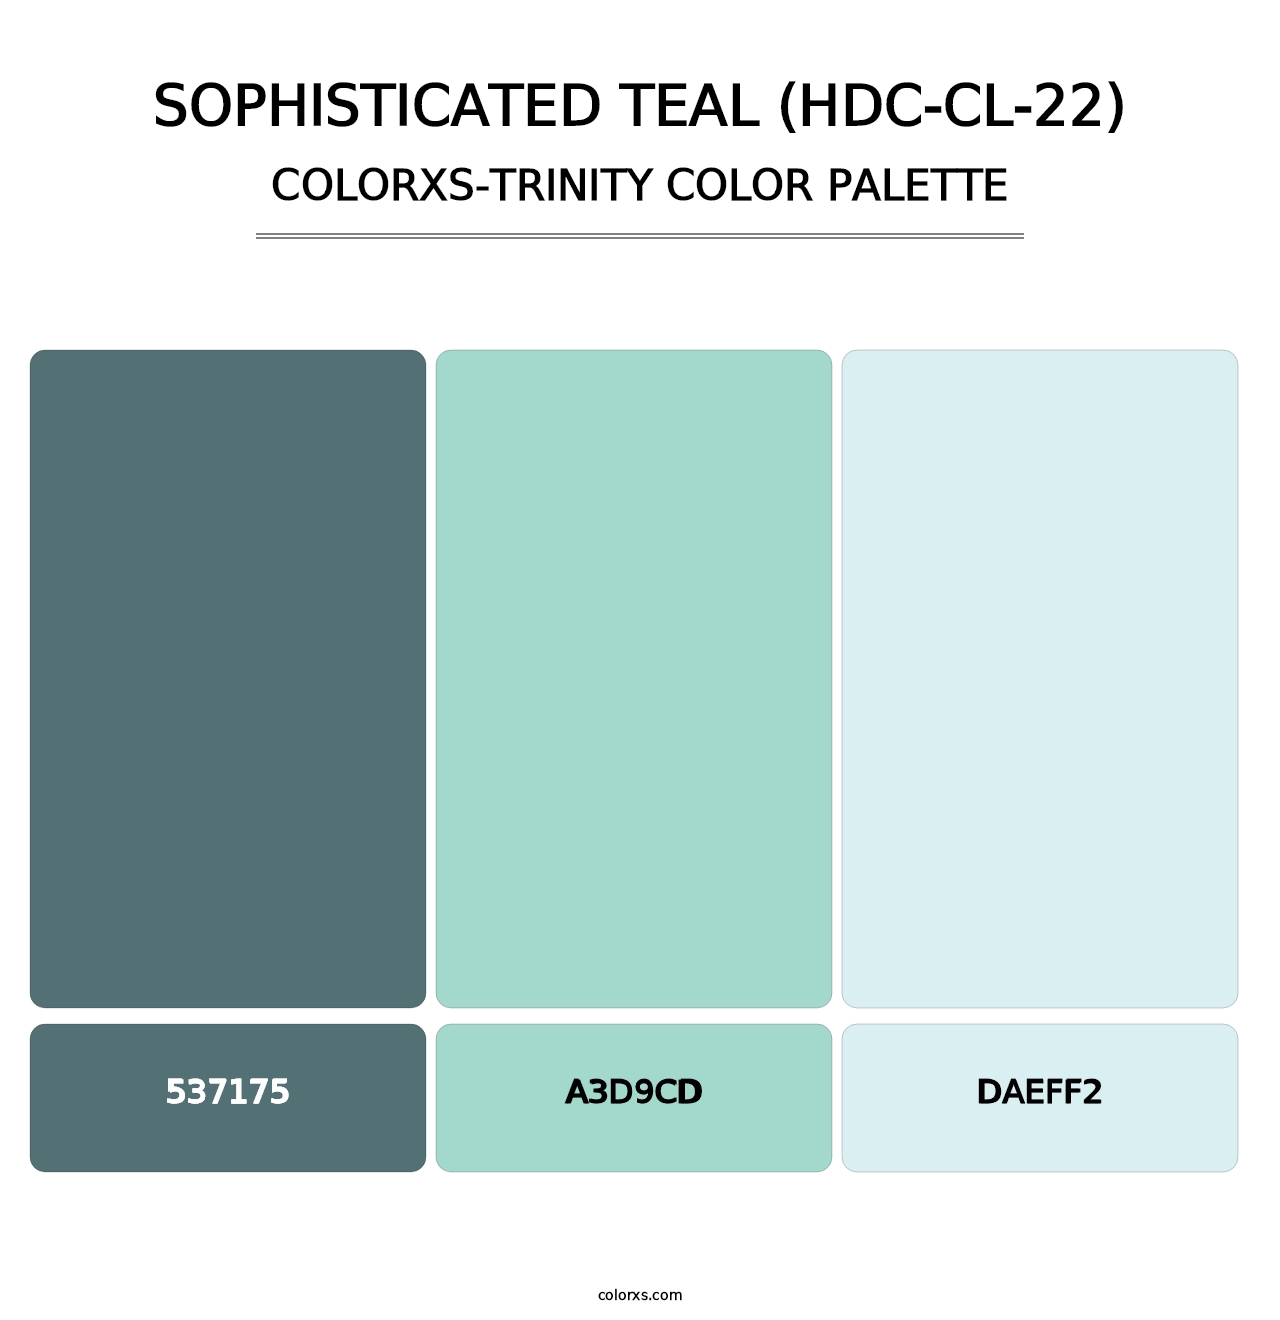 Sophisticated Teal (HDC-CL-22) - Colorxs Trinity Palette